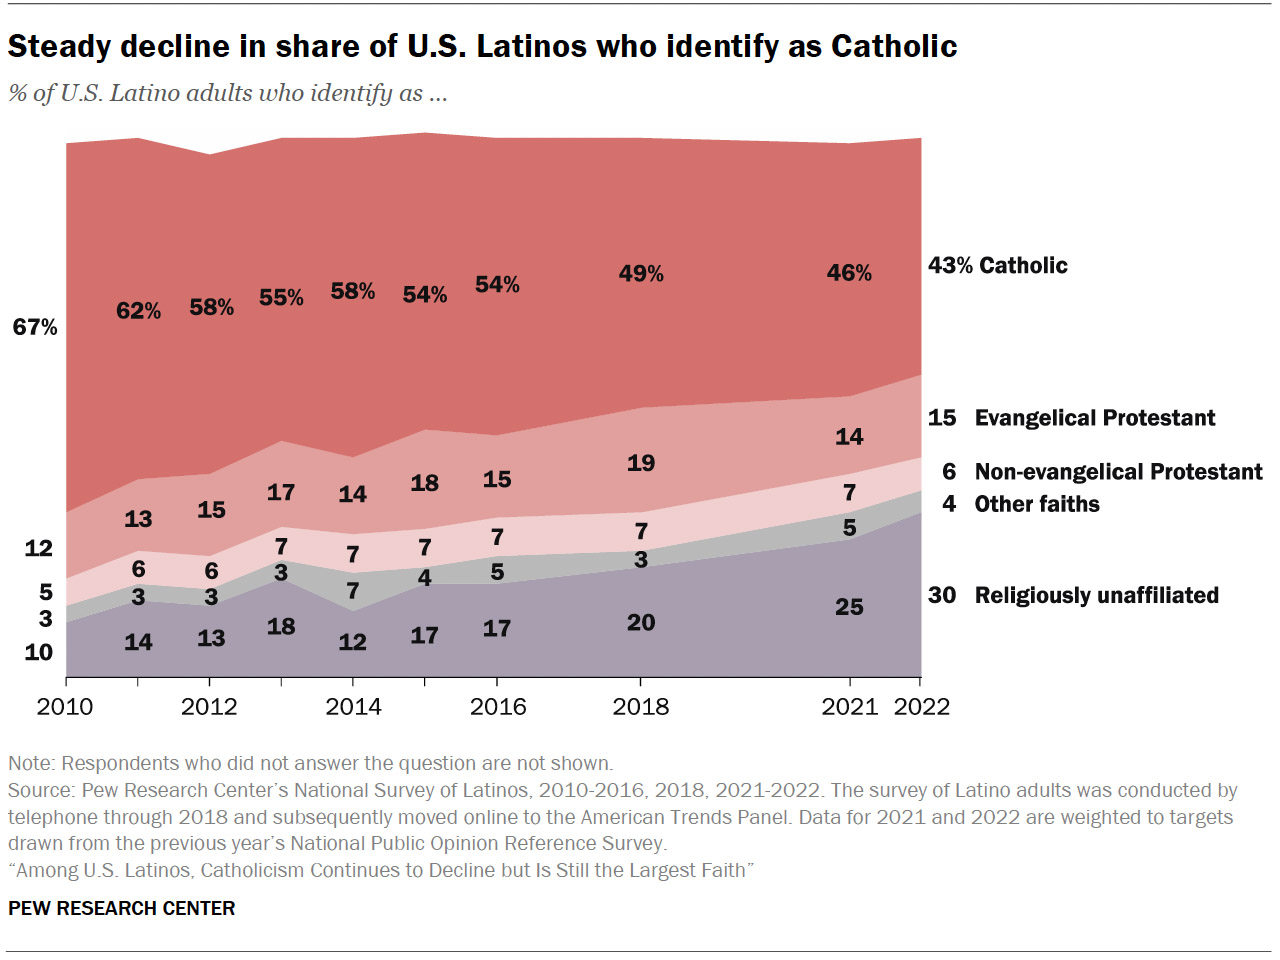 "Steady decline in share of U.S. Latinos who identify as Catholic" Graphic courtesy of Pew Research Center